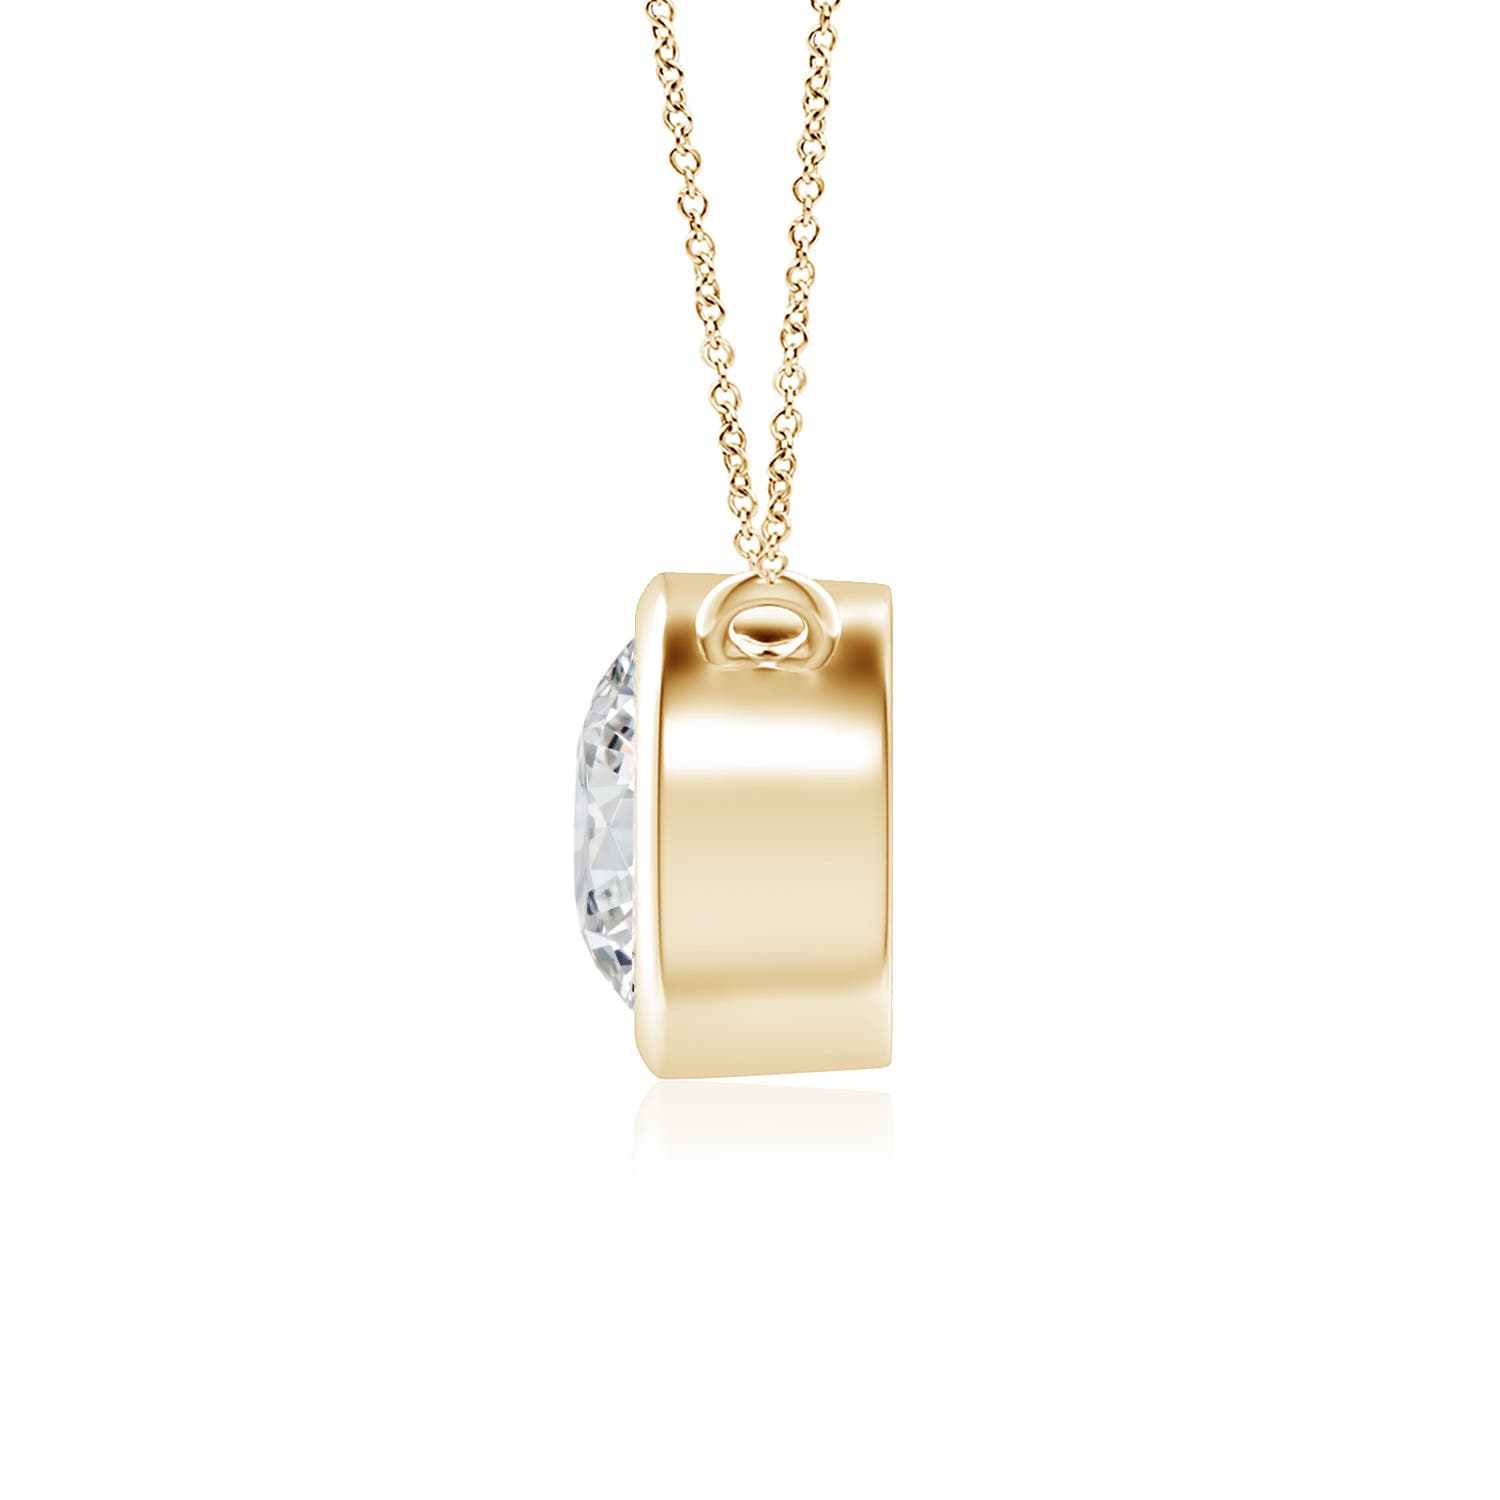 HSI2 / 0.5 CT / 14 KT Yellow Gold